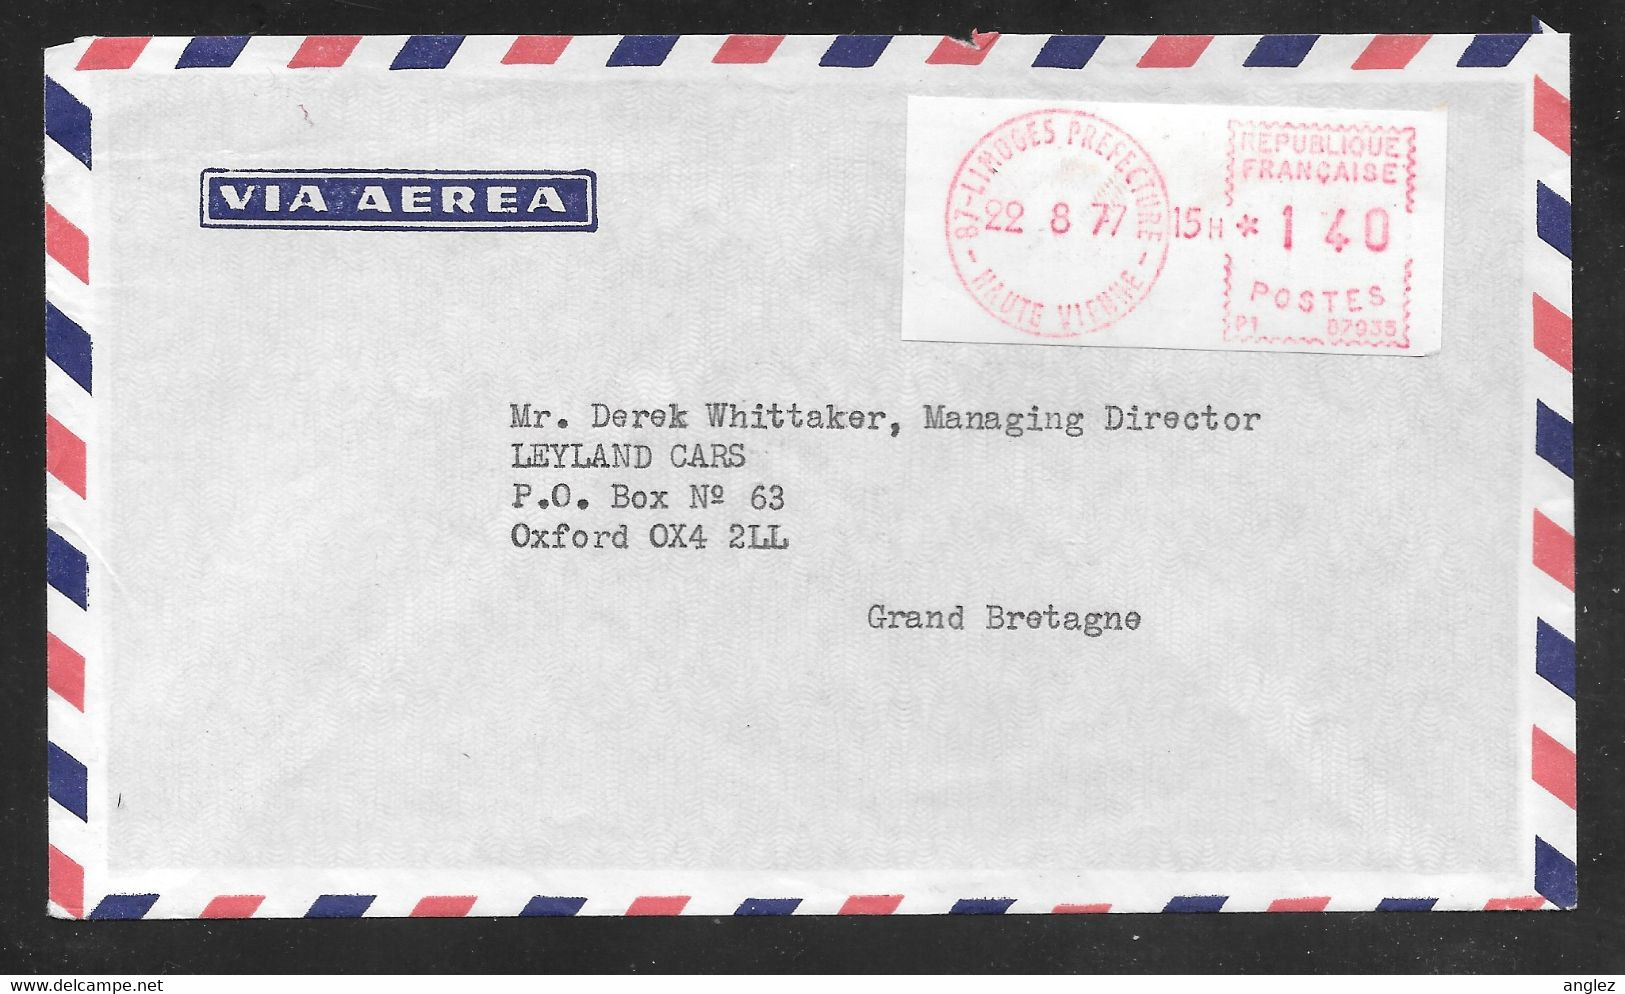 France - 1977 Airmail Cover - Limoges To England - Franking Label - 1969 Montgeron – Papier Blanc – Frama/Satas